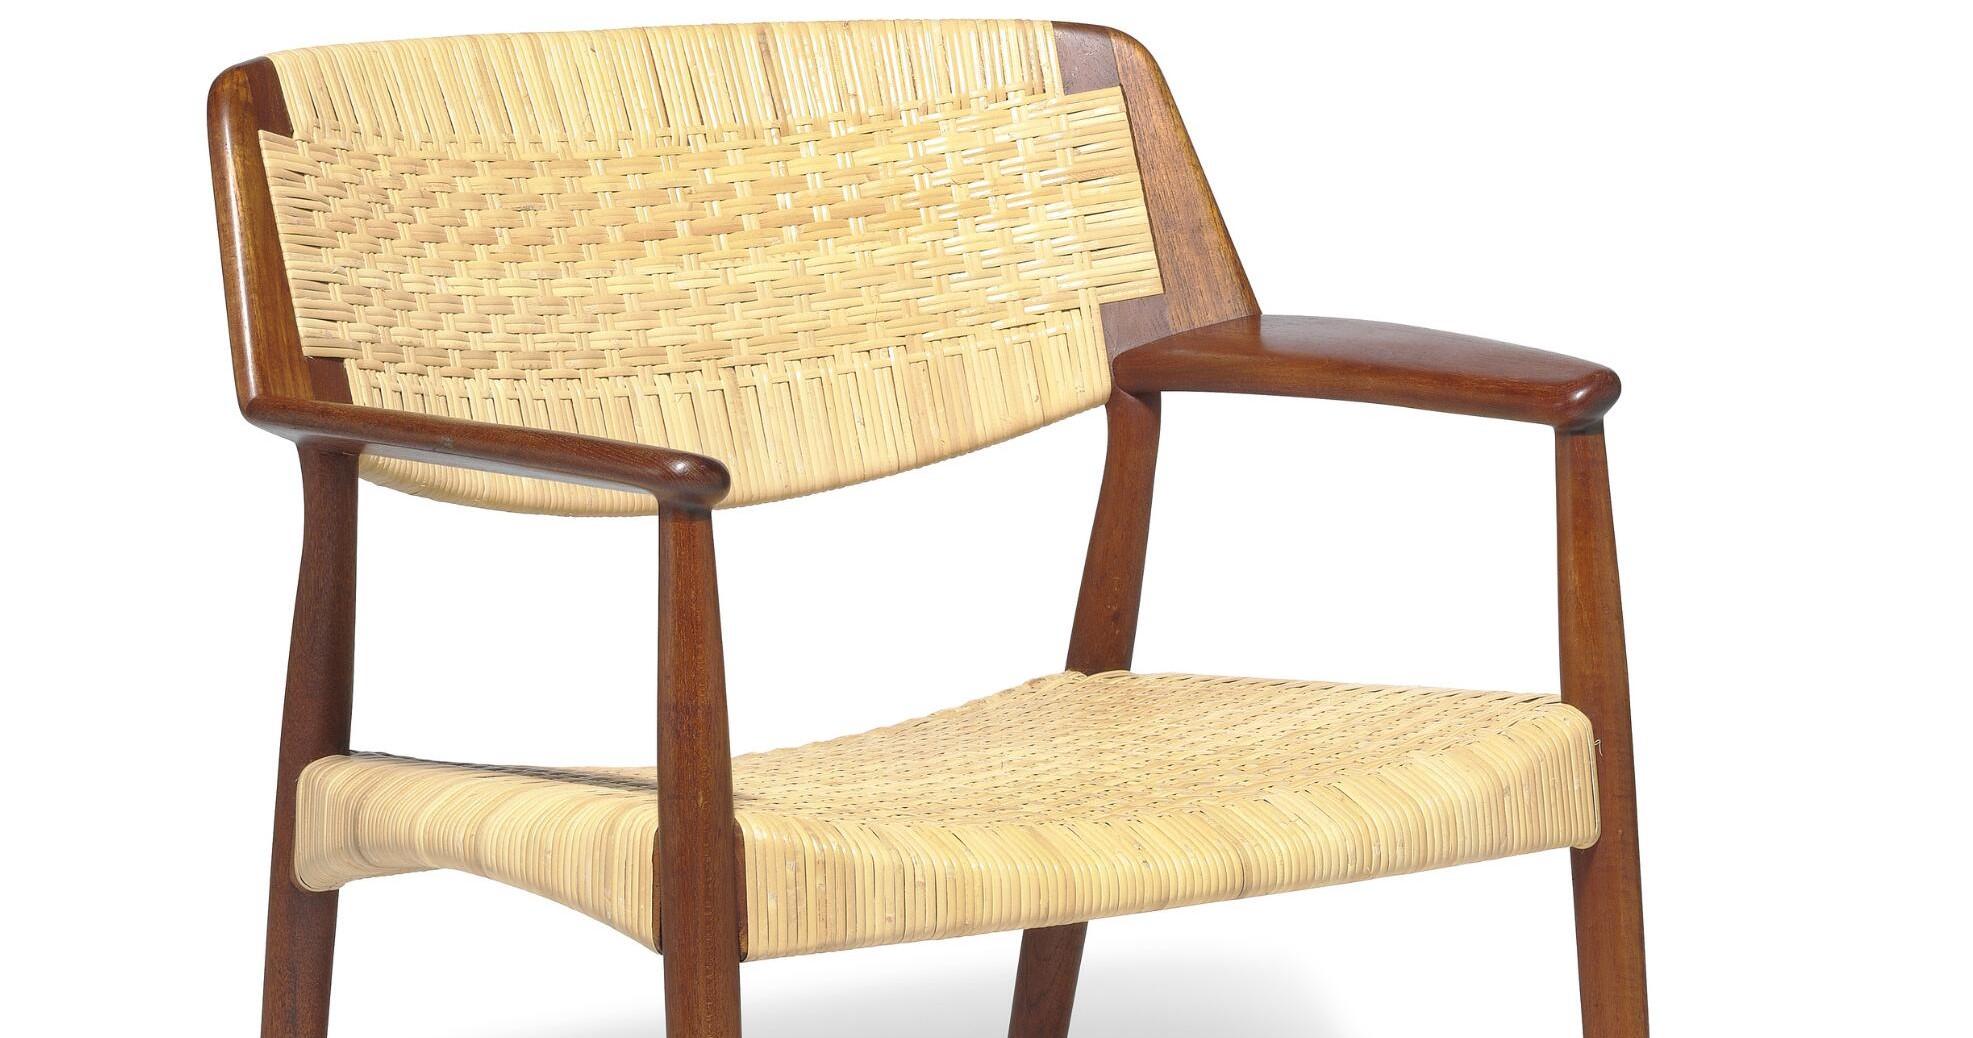 A rare teak armchair designed by Ejnar Larsen and Aksel Bender Madsen. Seat and back with woven cane. Designed 1955. This example made 1950–1960s by cabinetmaker Willy Beck.

Literature: Christian Holmsted Olesen, “Mesterværker 100 års dansk